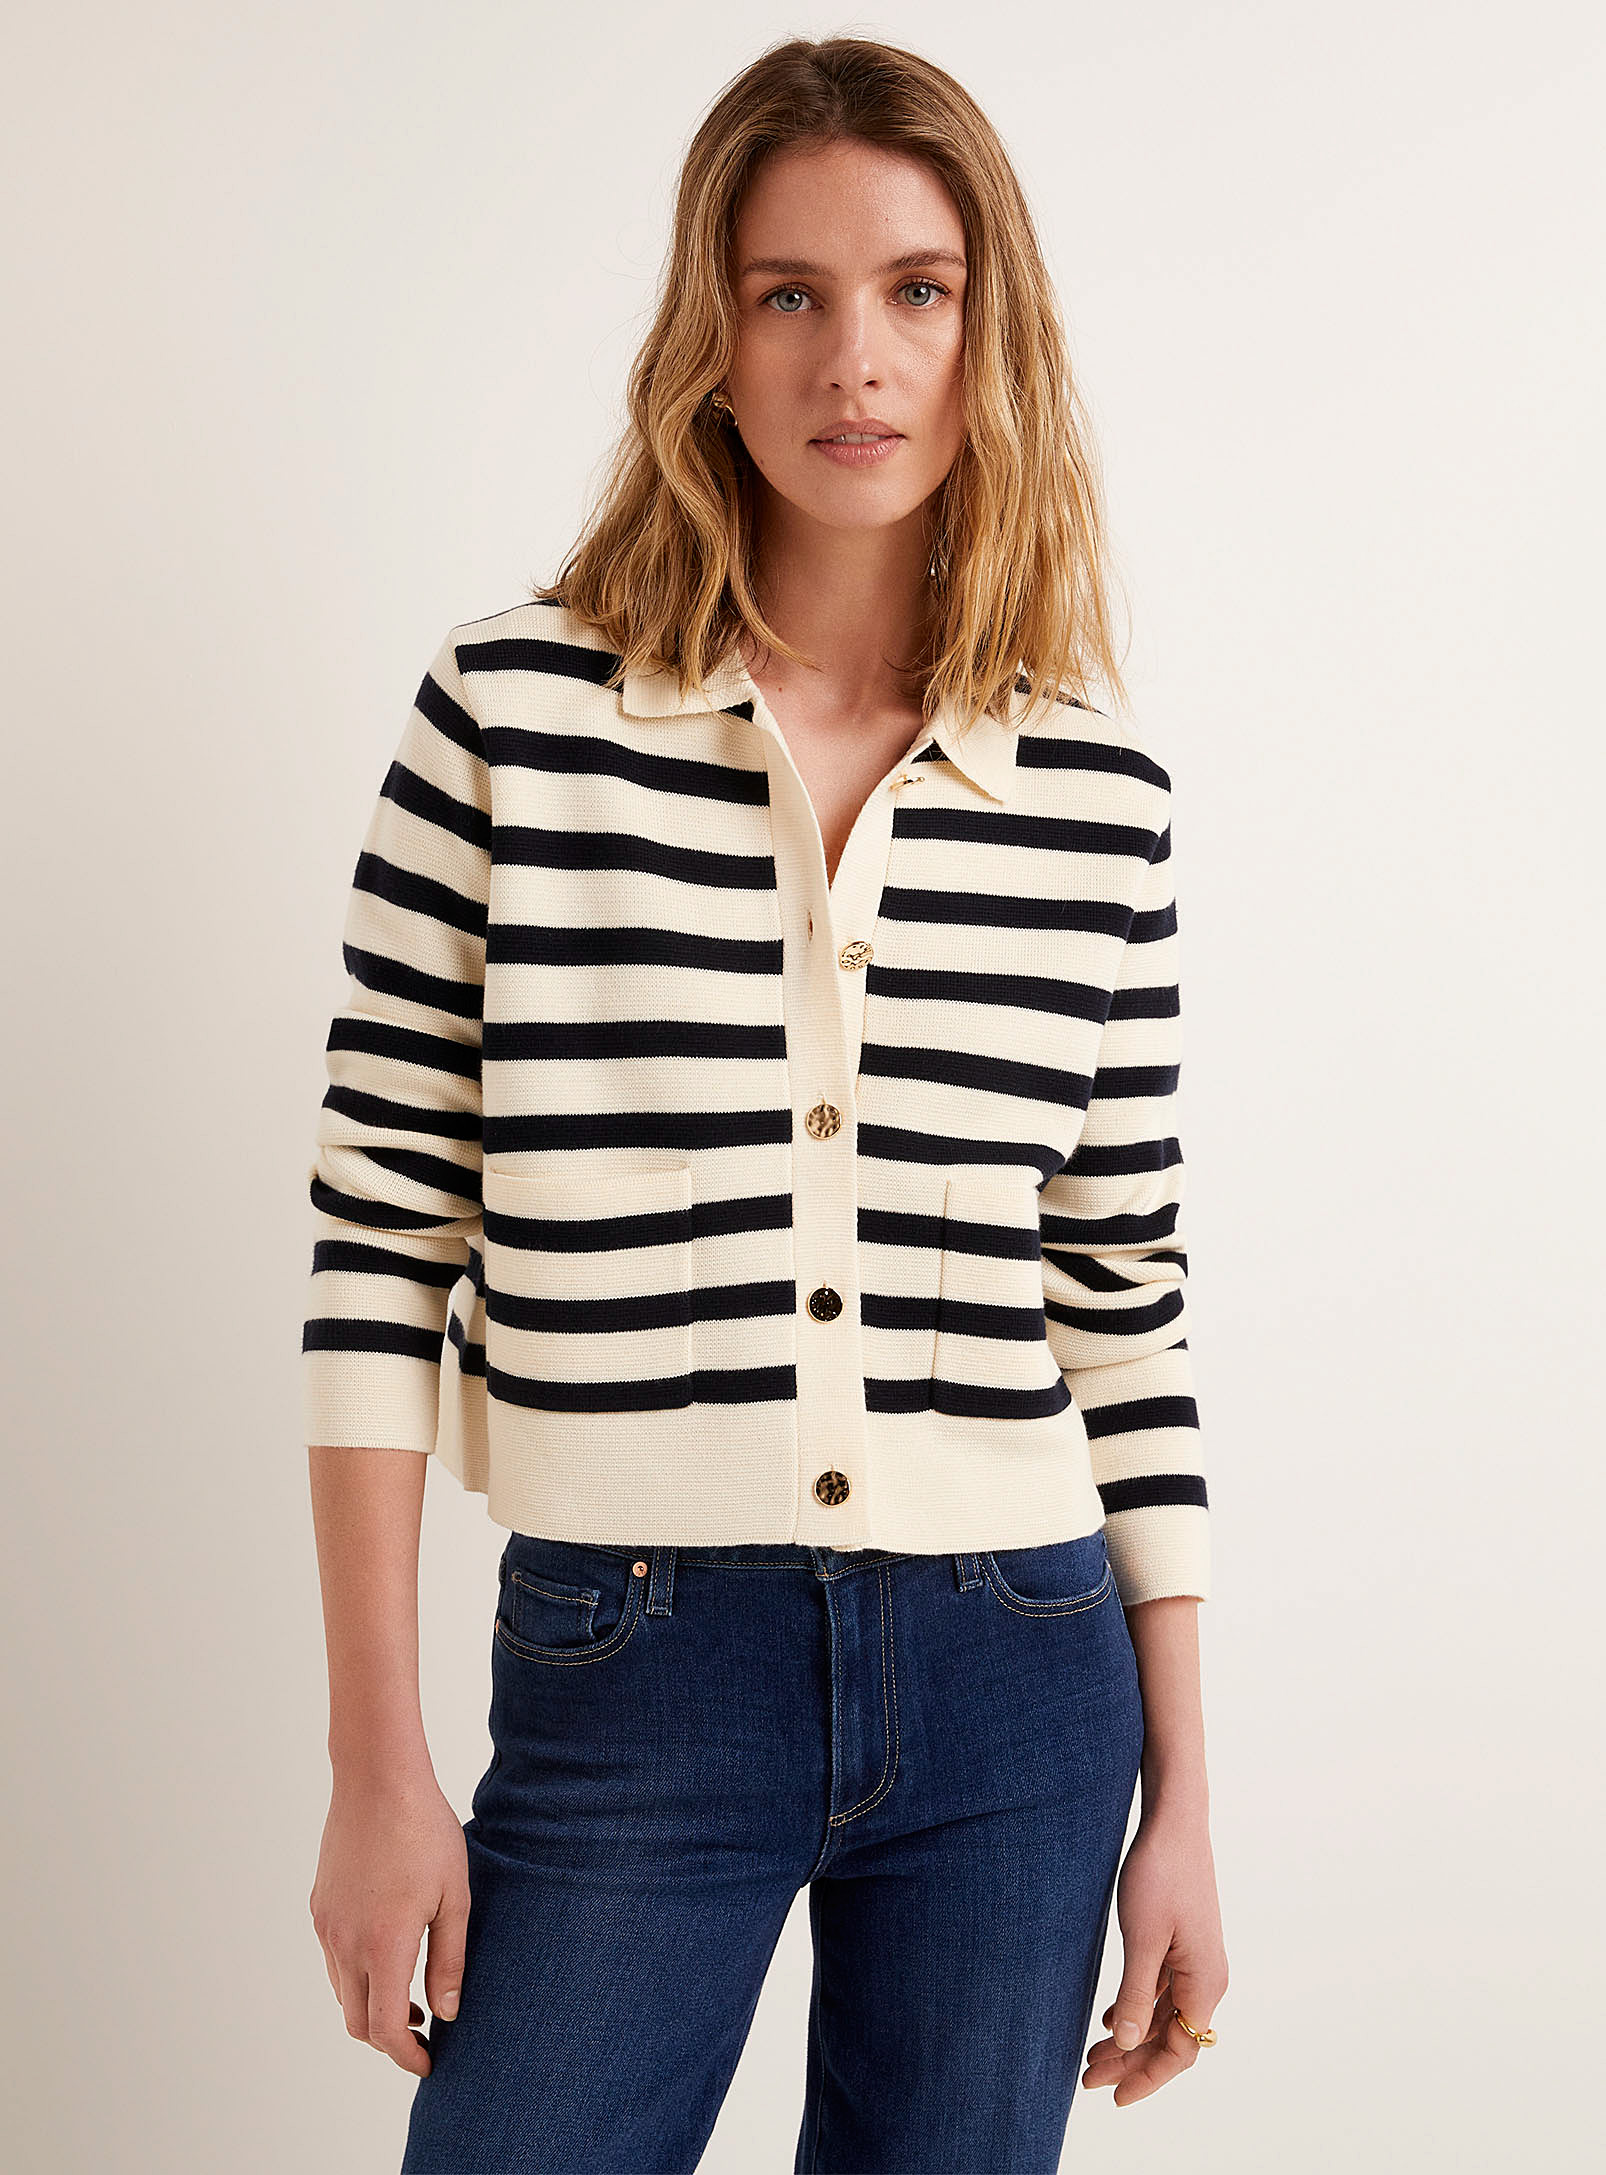 Contemporaine Golden Buttons Striped Cardigan In Patterned Blue